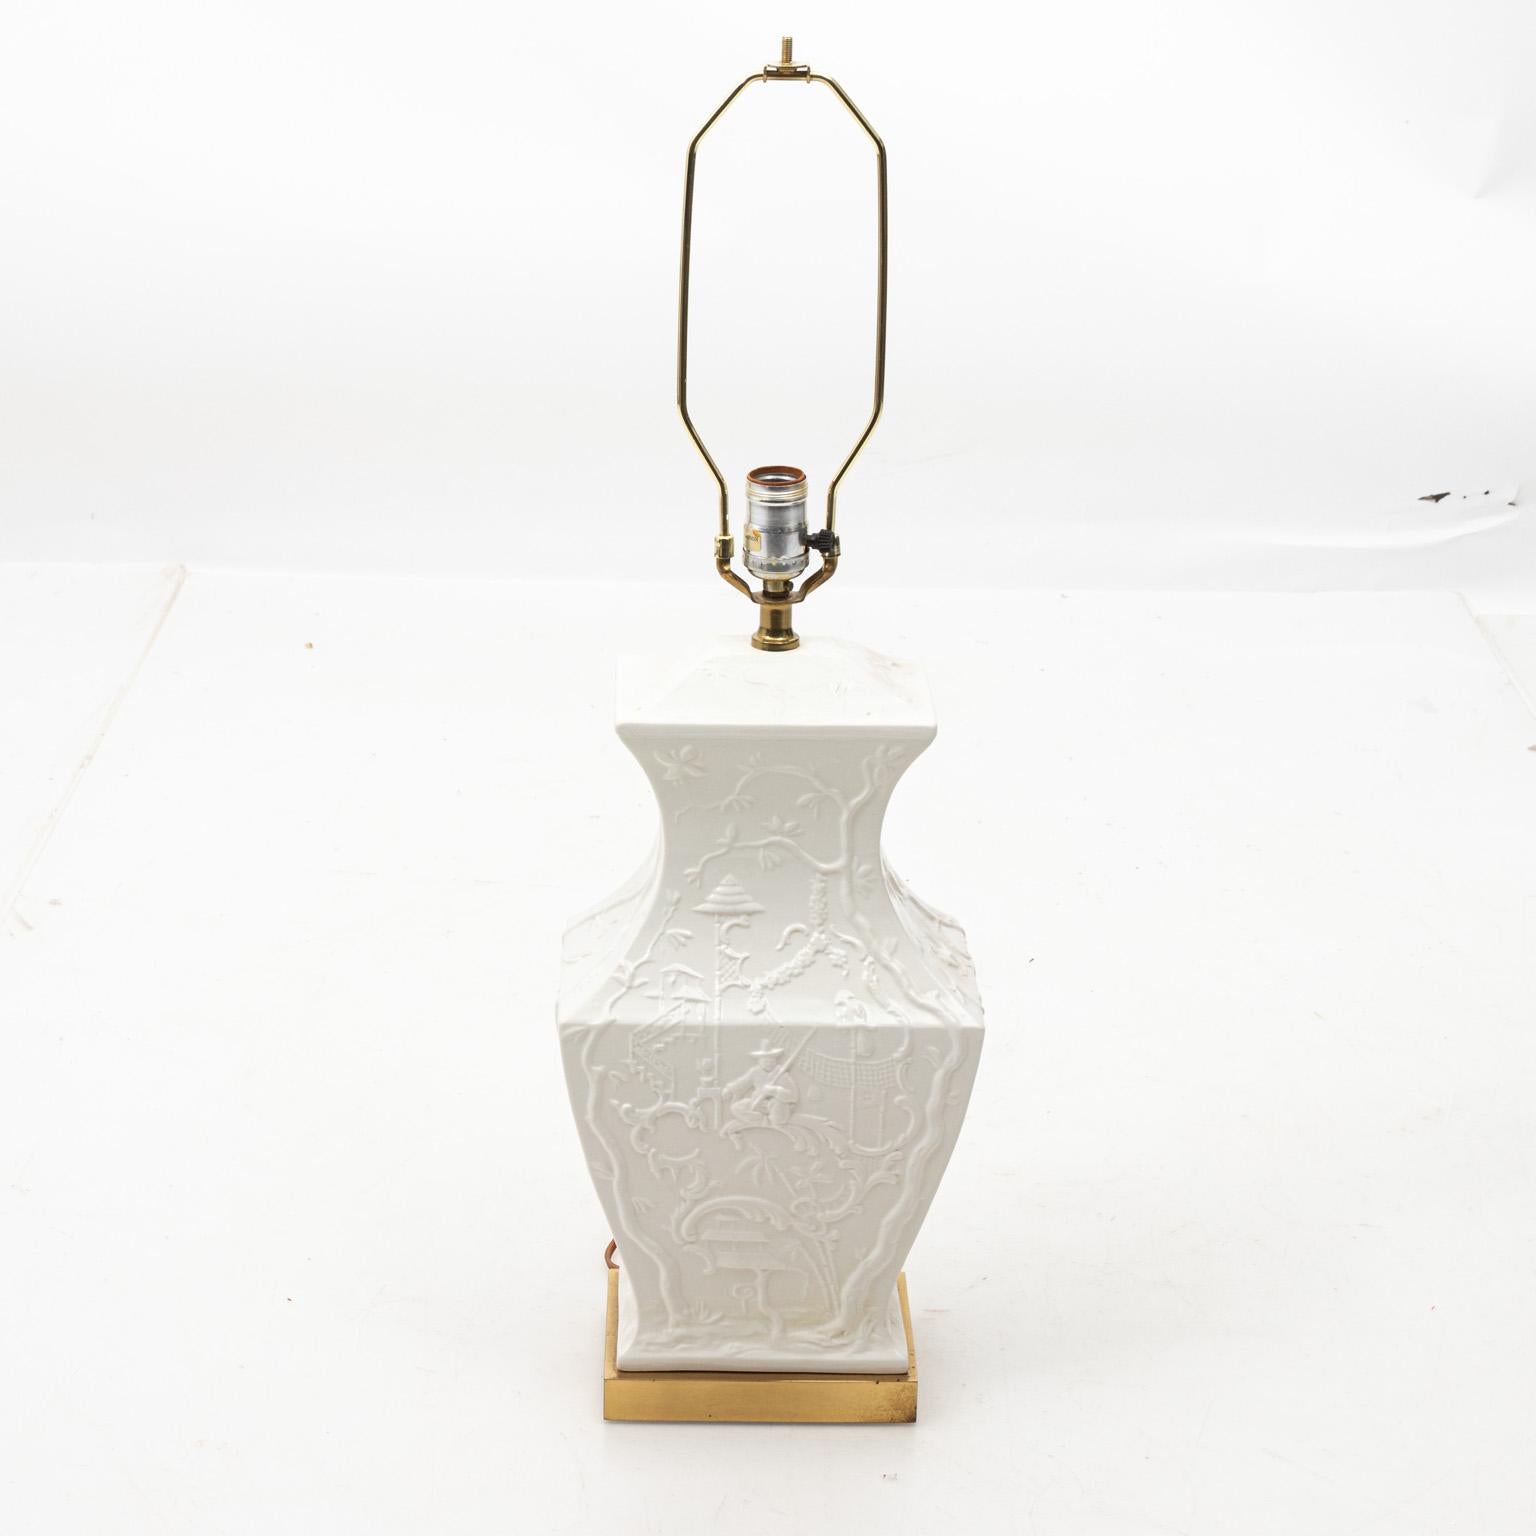 White painted chinoiserie ceramic lamp with brass base, circa 1970s. Please note of wear consistent with age including slight markings on the base. Shades not included.